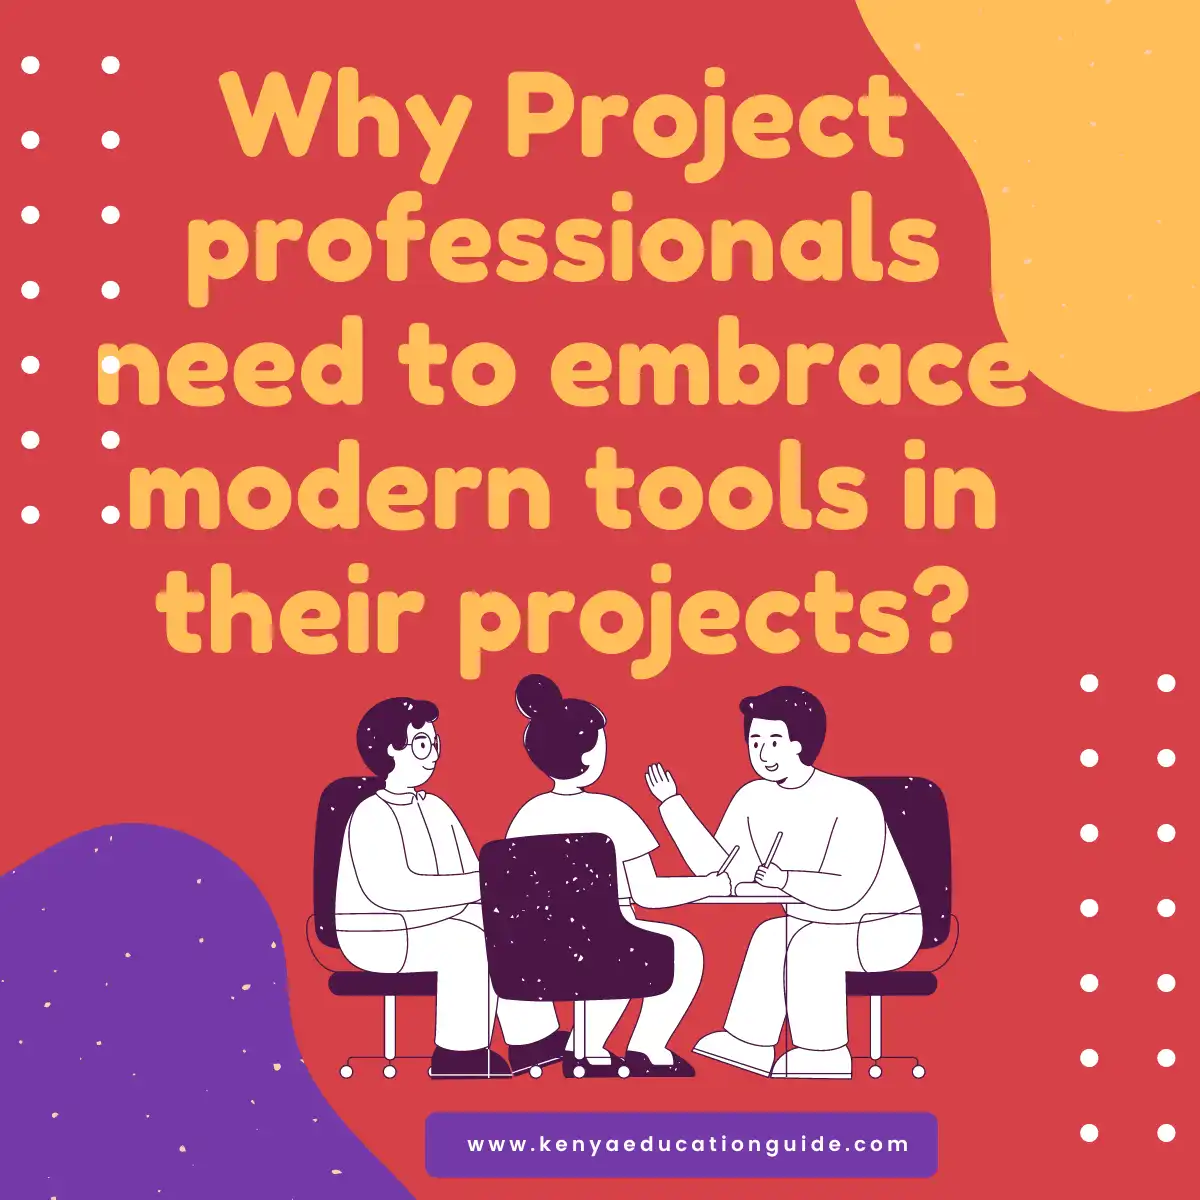 Why Project professionals need to embrace modern tools in their projects